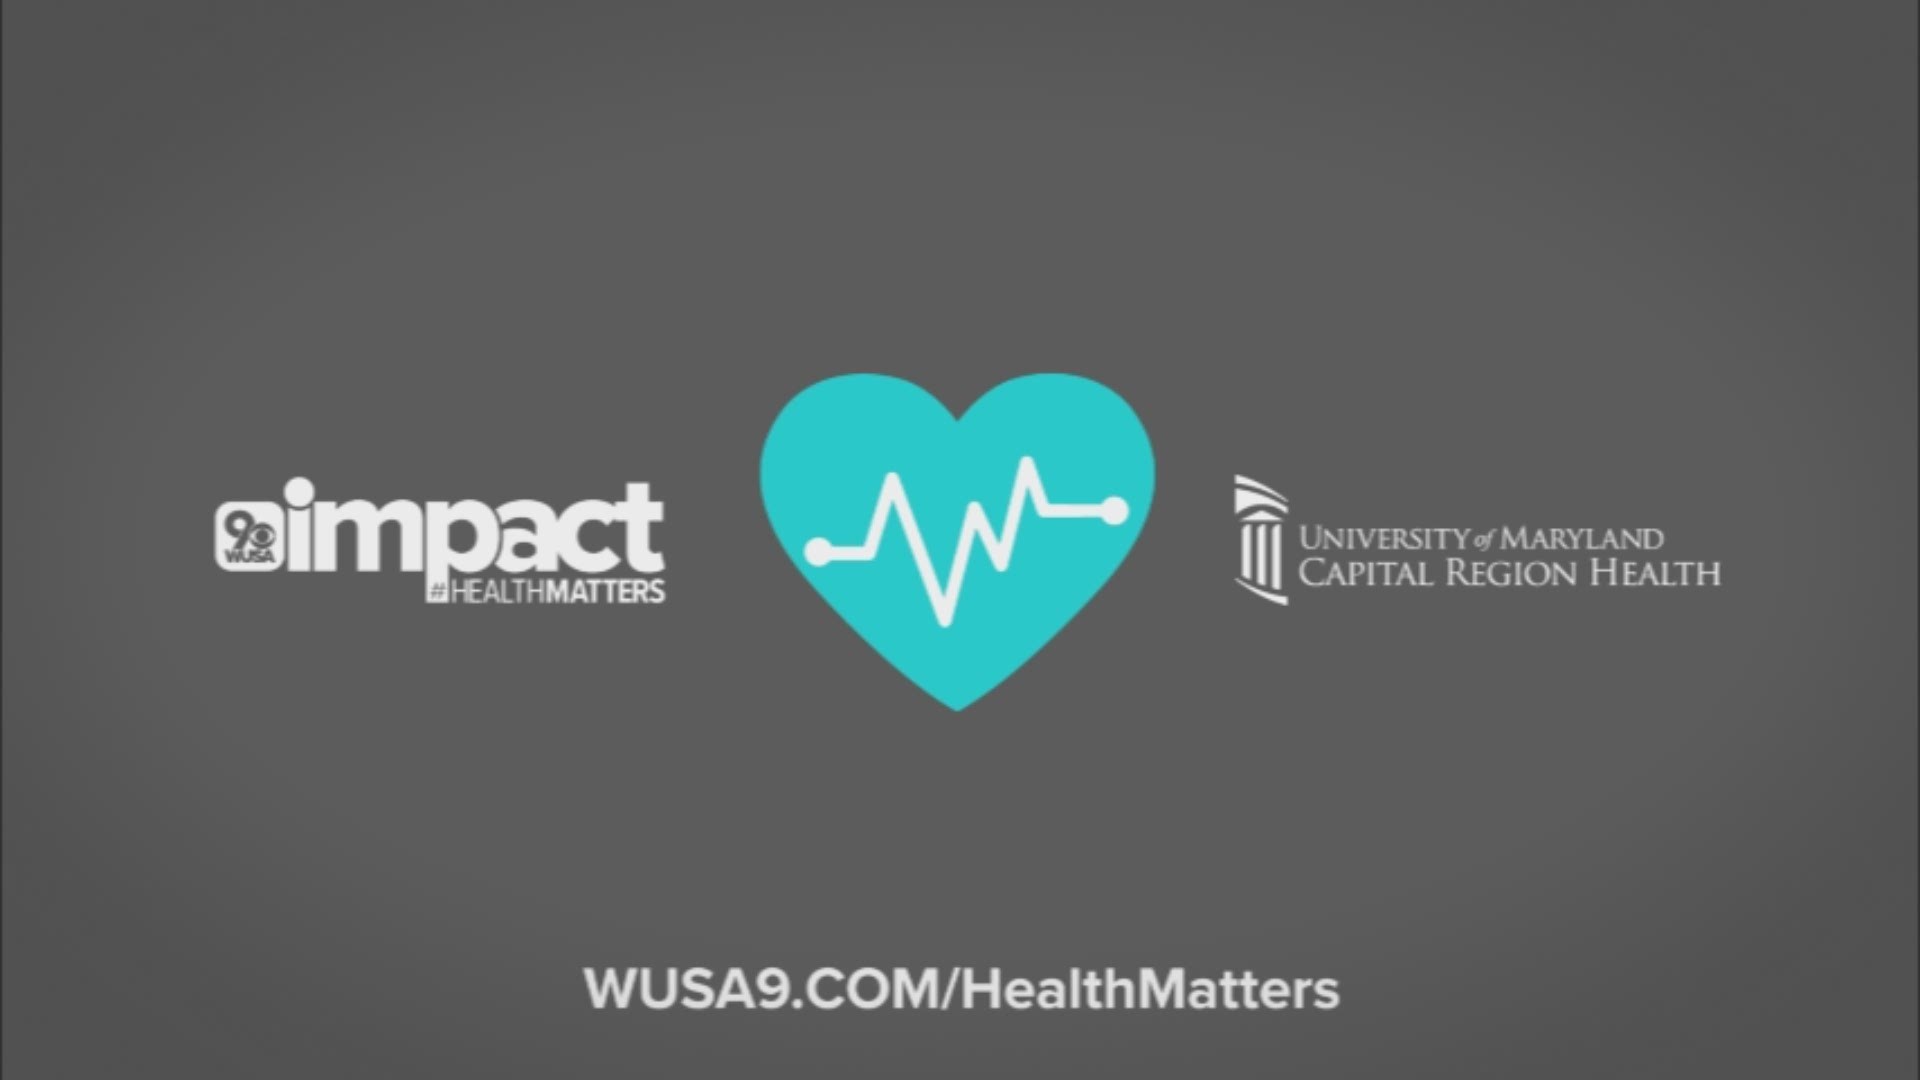 WUSA9 is hosting a free health expo with University of Maryland Capital Region Health and the Prince George's County Health Department at the Kentland Community Center in Landover, Md.